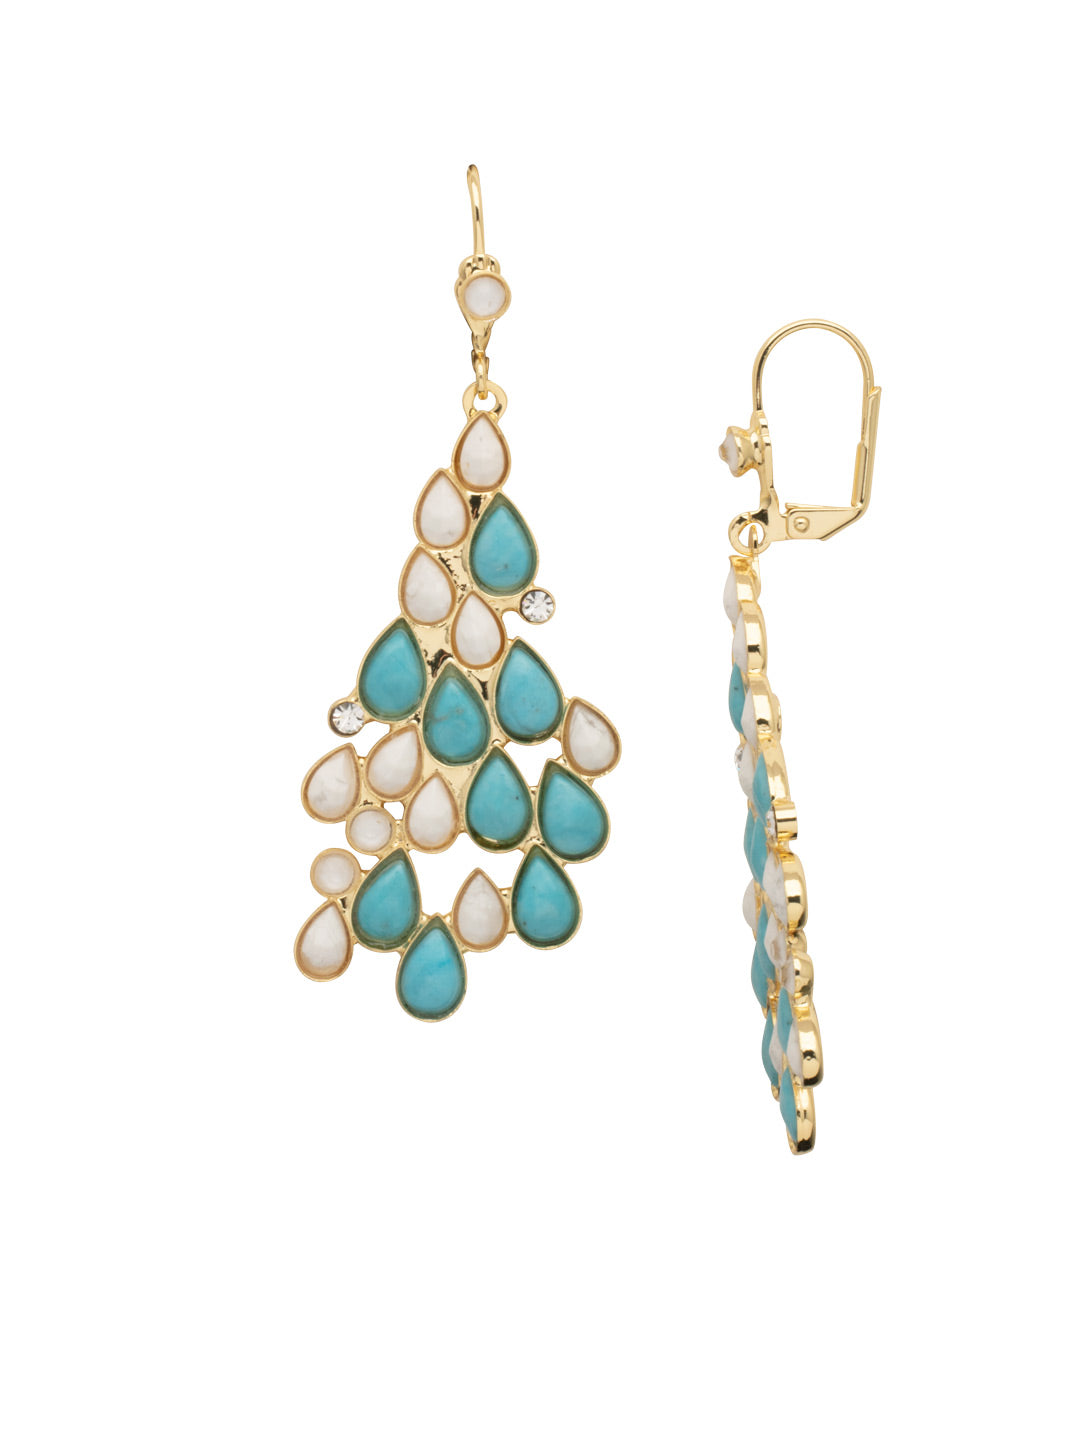 Misty Statement Earrings - EFD3BGSTO - <p>The Misty Statement Earrings feature an assortment of small semi-precious pear cut stones in a chandelier style setting, dangling from a lever back French Wire. From Sorrelli's Santorini collection in our Bright Gold-tone finish.</p>